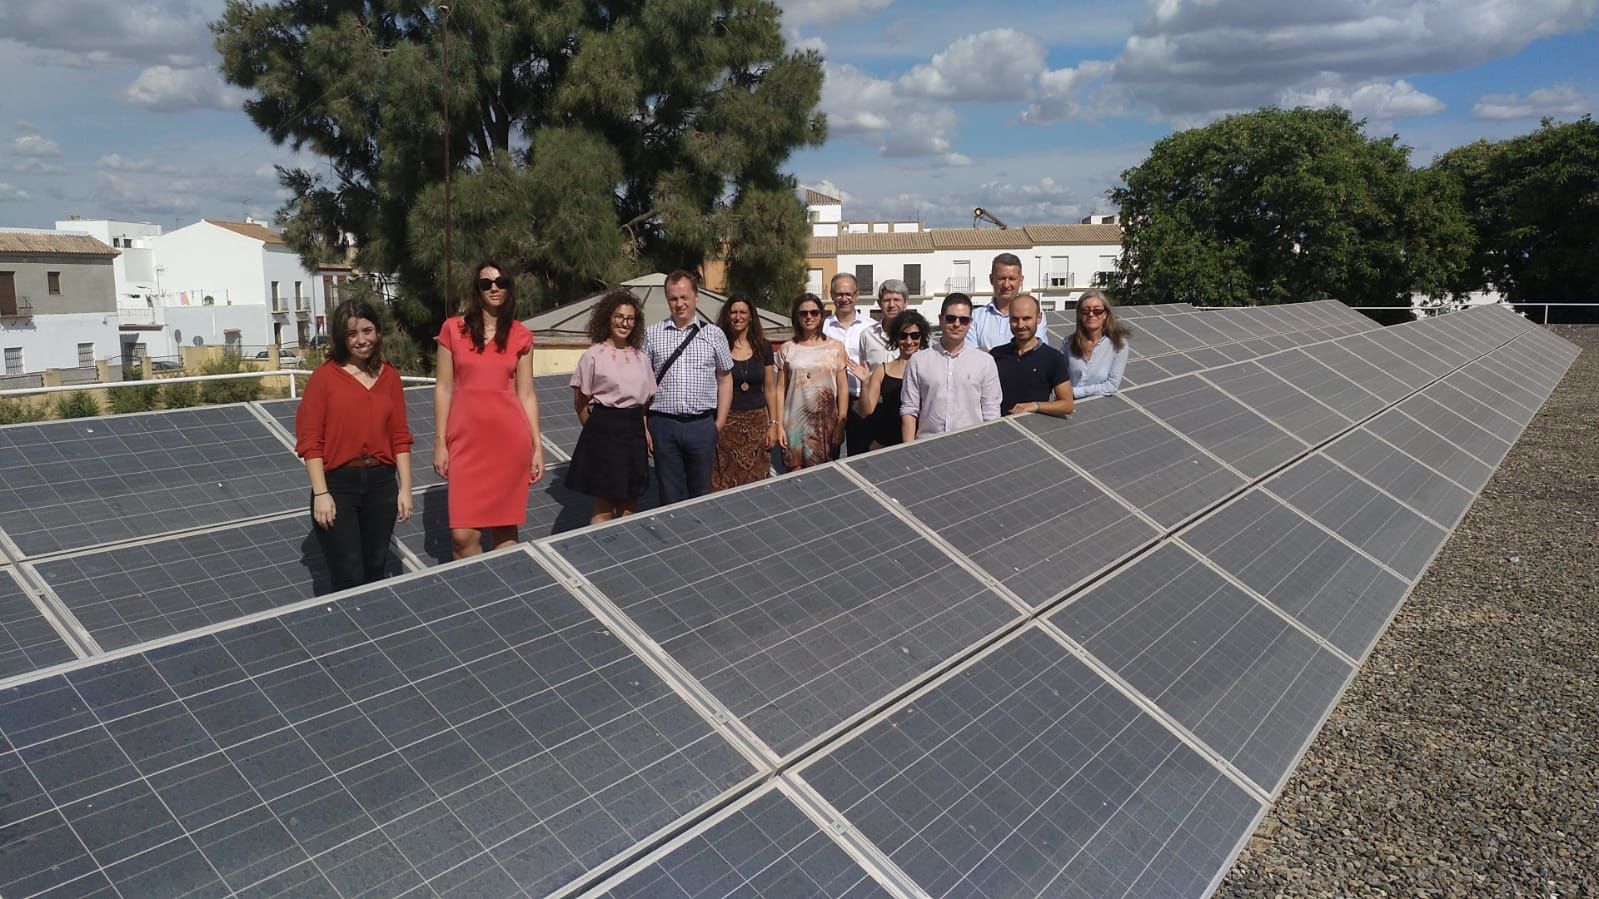 POWERTY project is launched in Seville